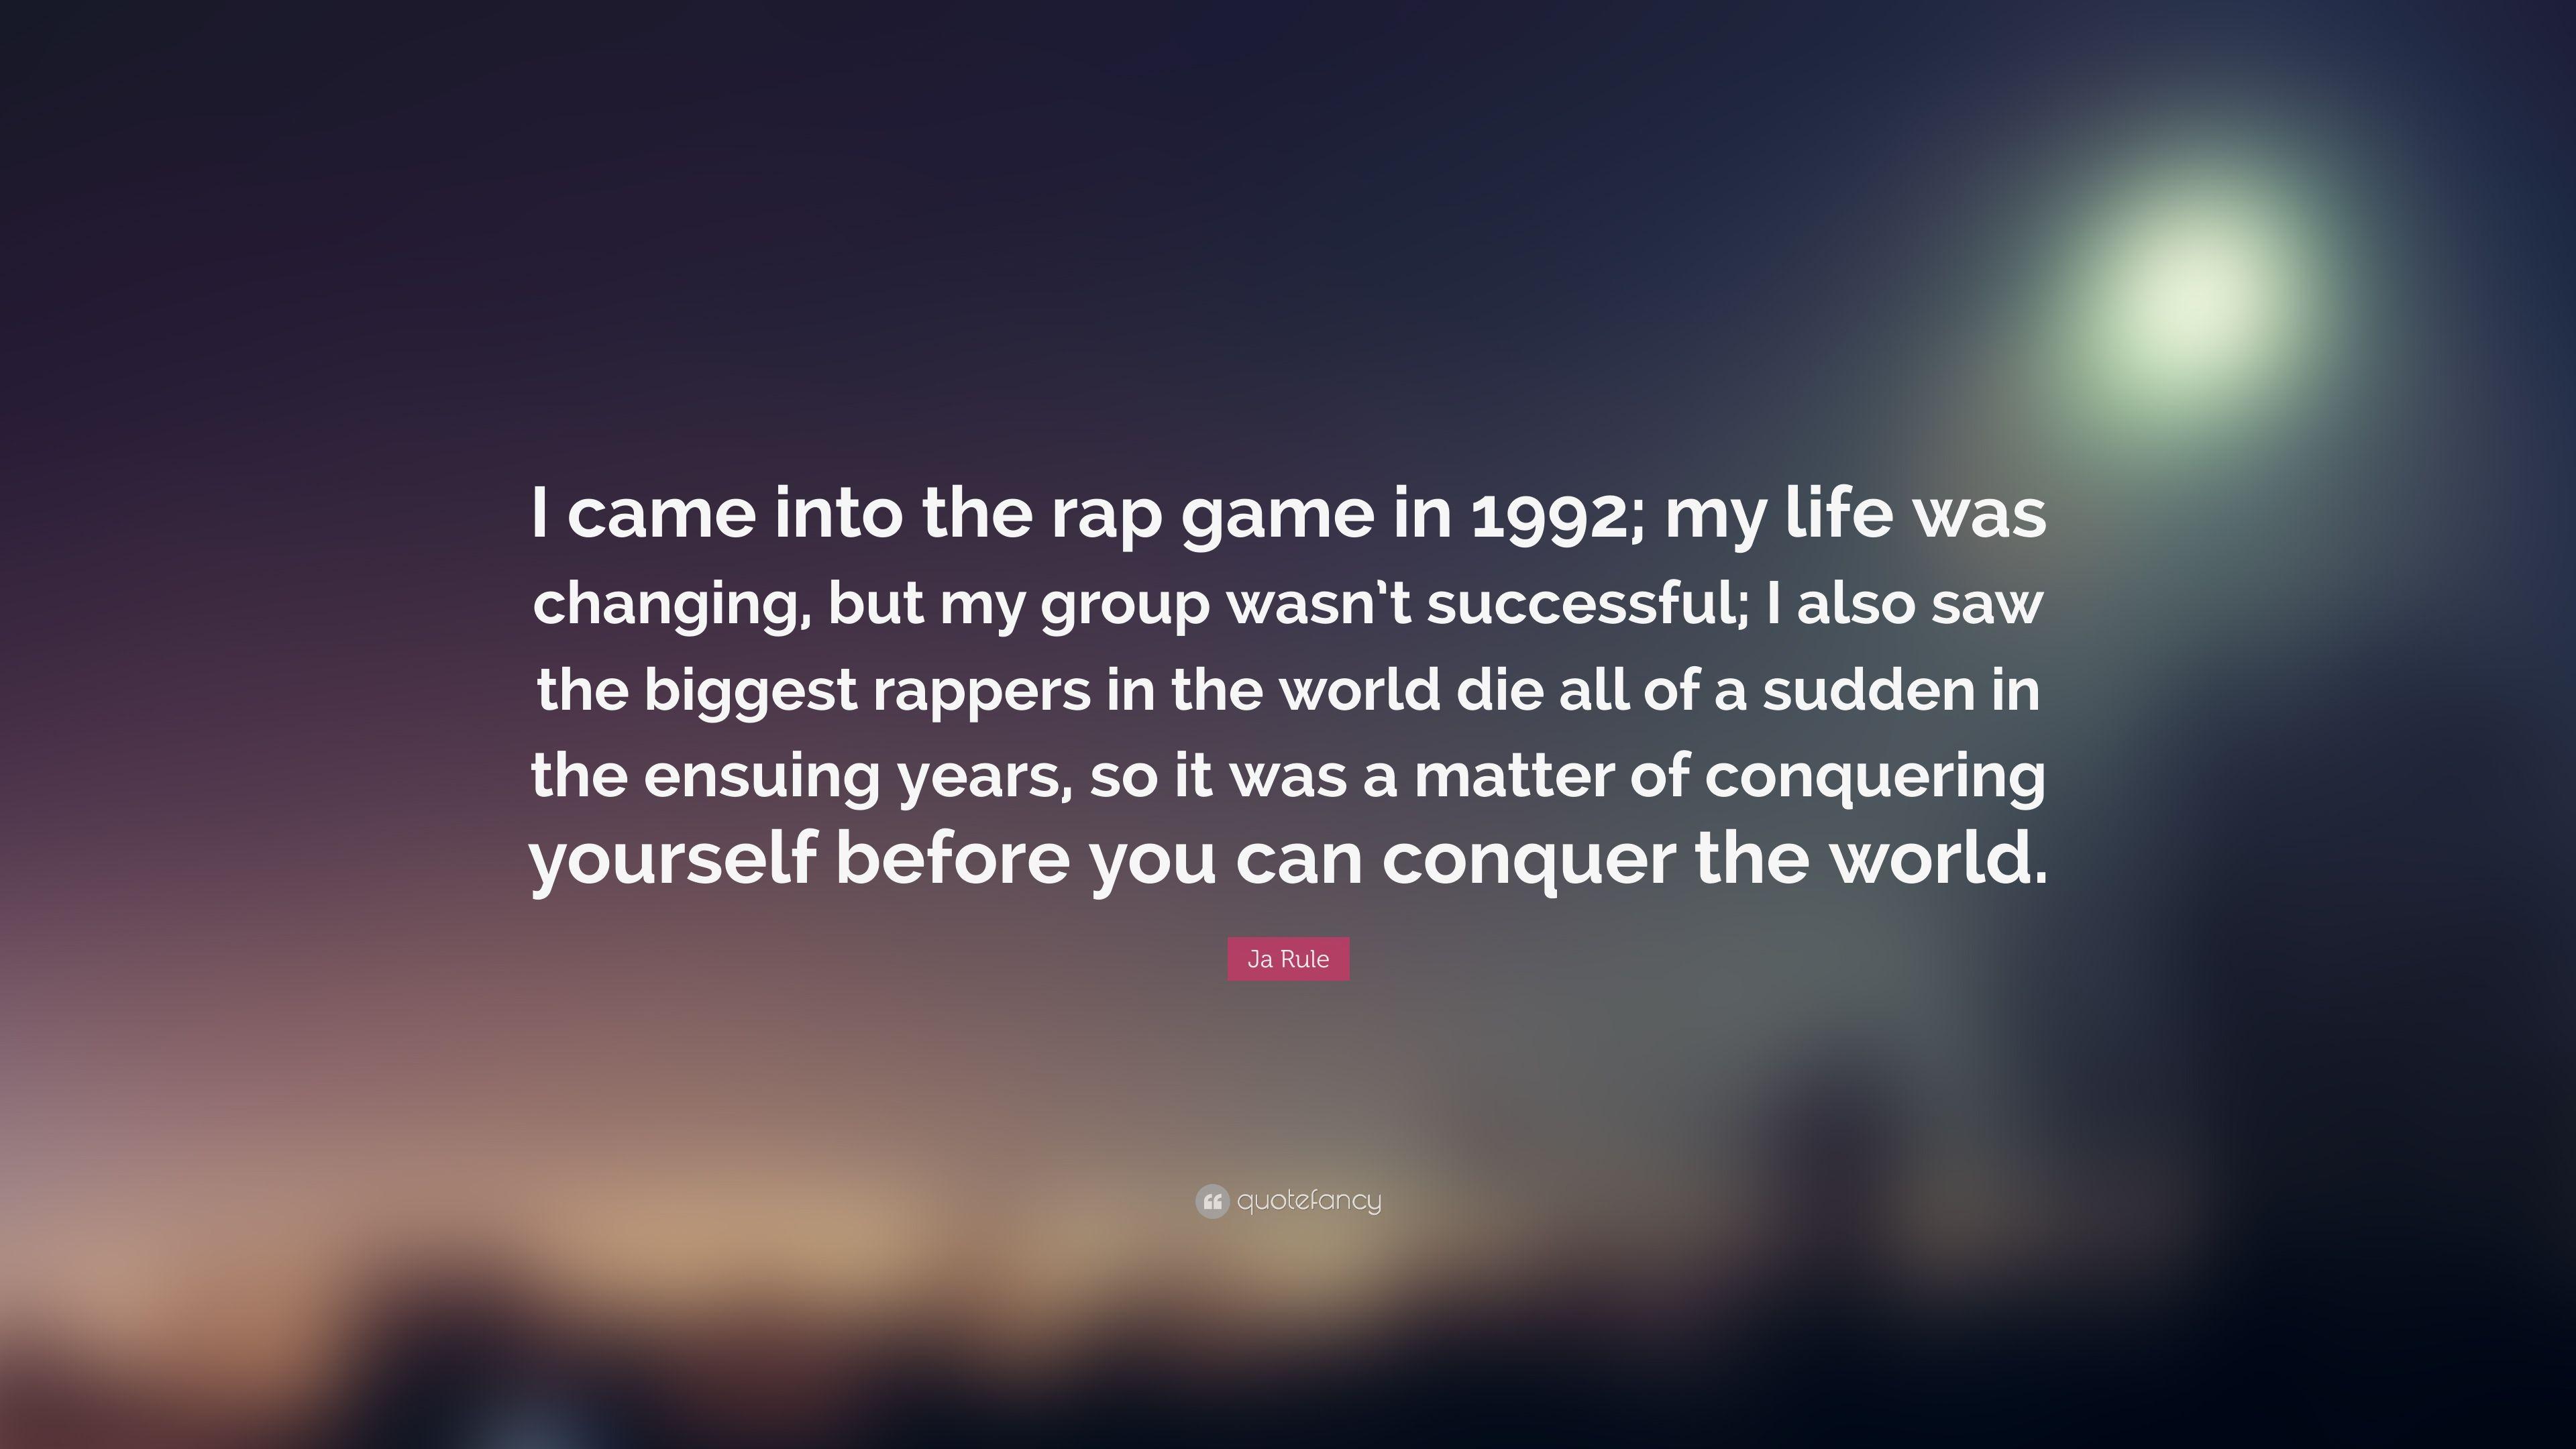 Ja Rule Quote: “I came into the rap game in 1992; my life was